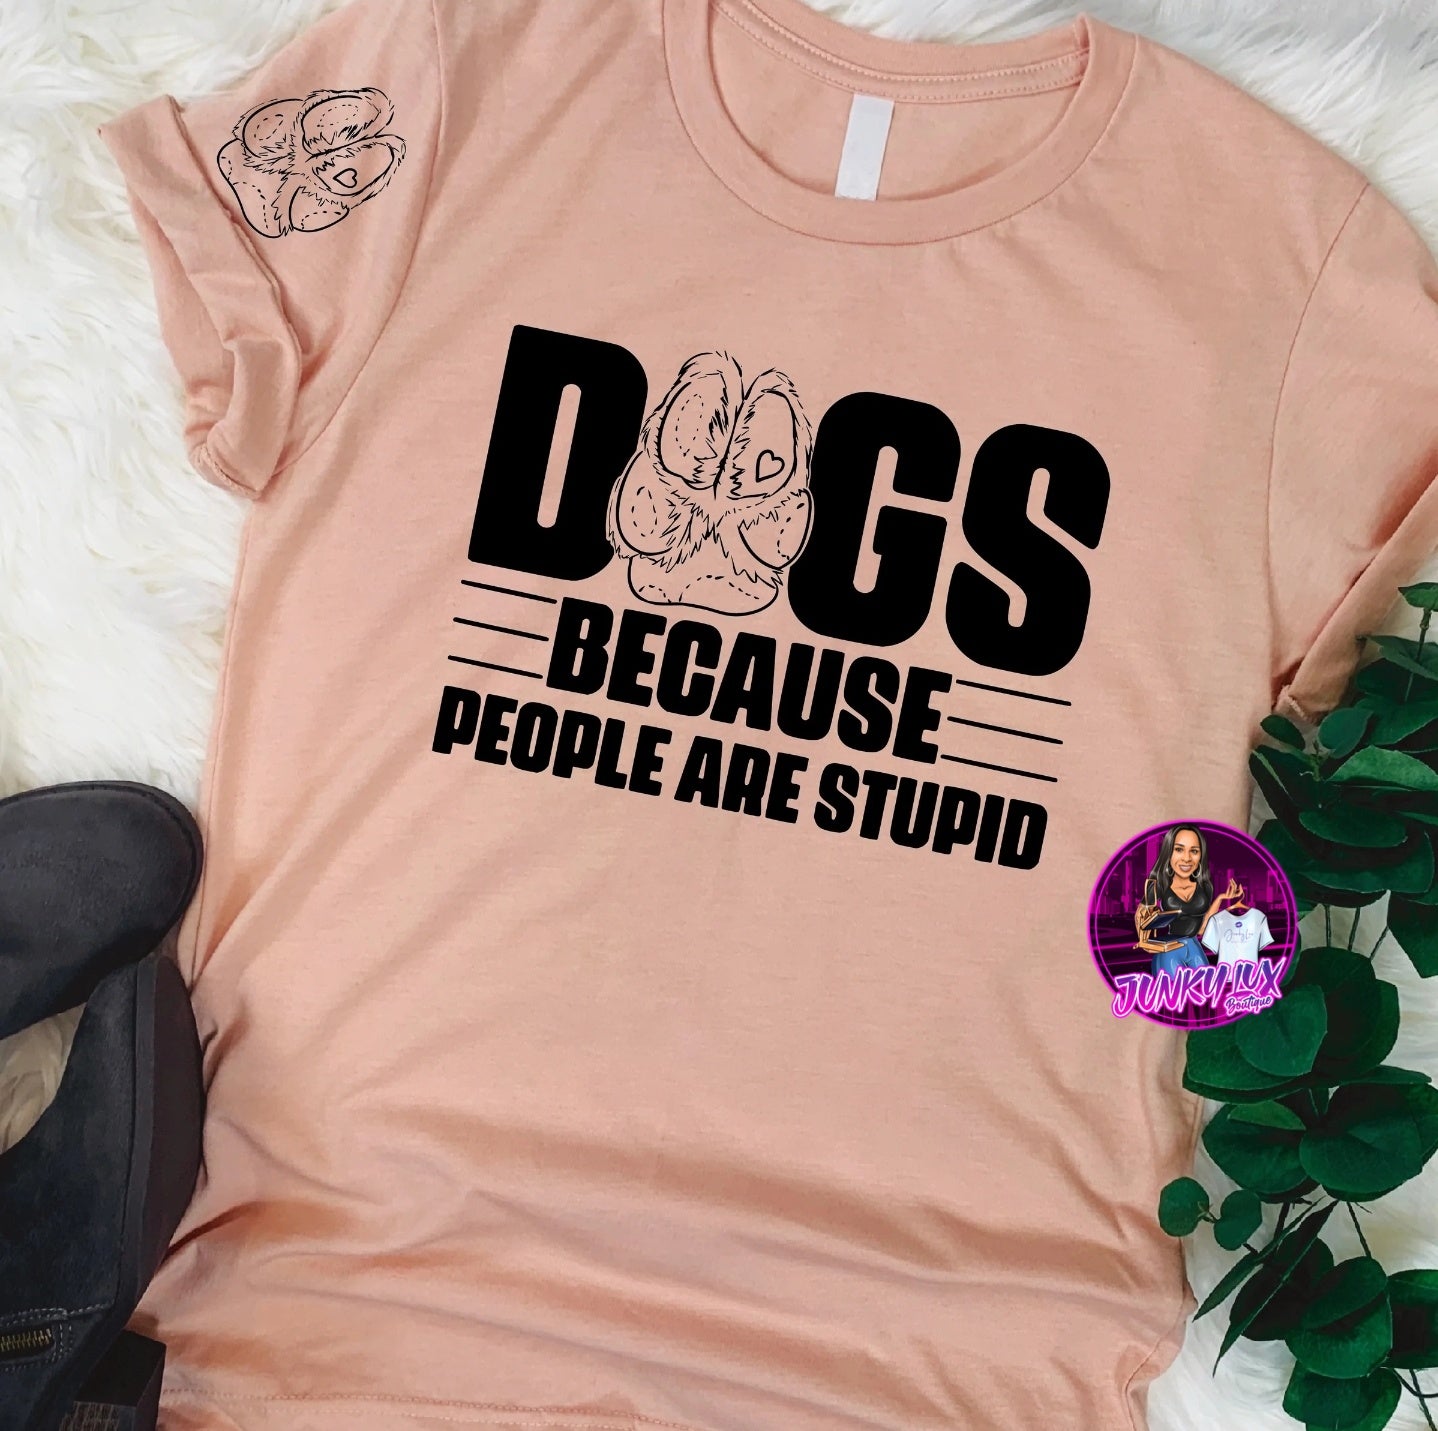 Dogs-Because People Are Stupid (includes sleeve)